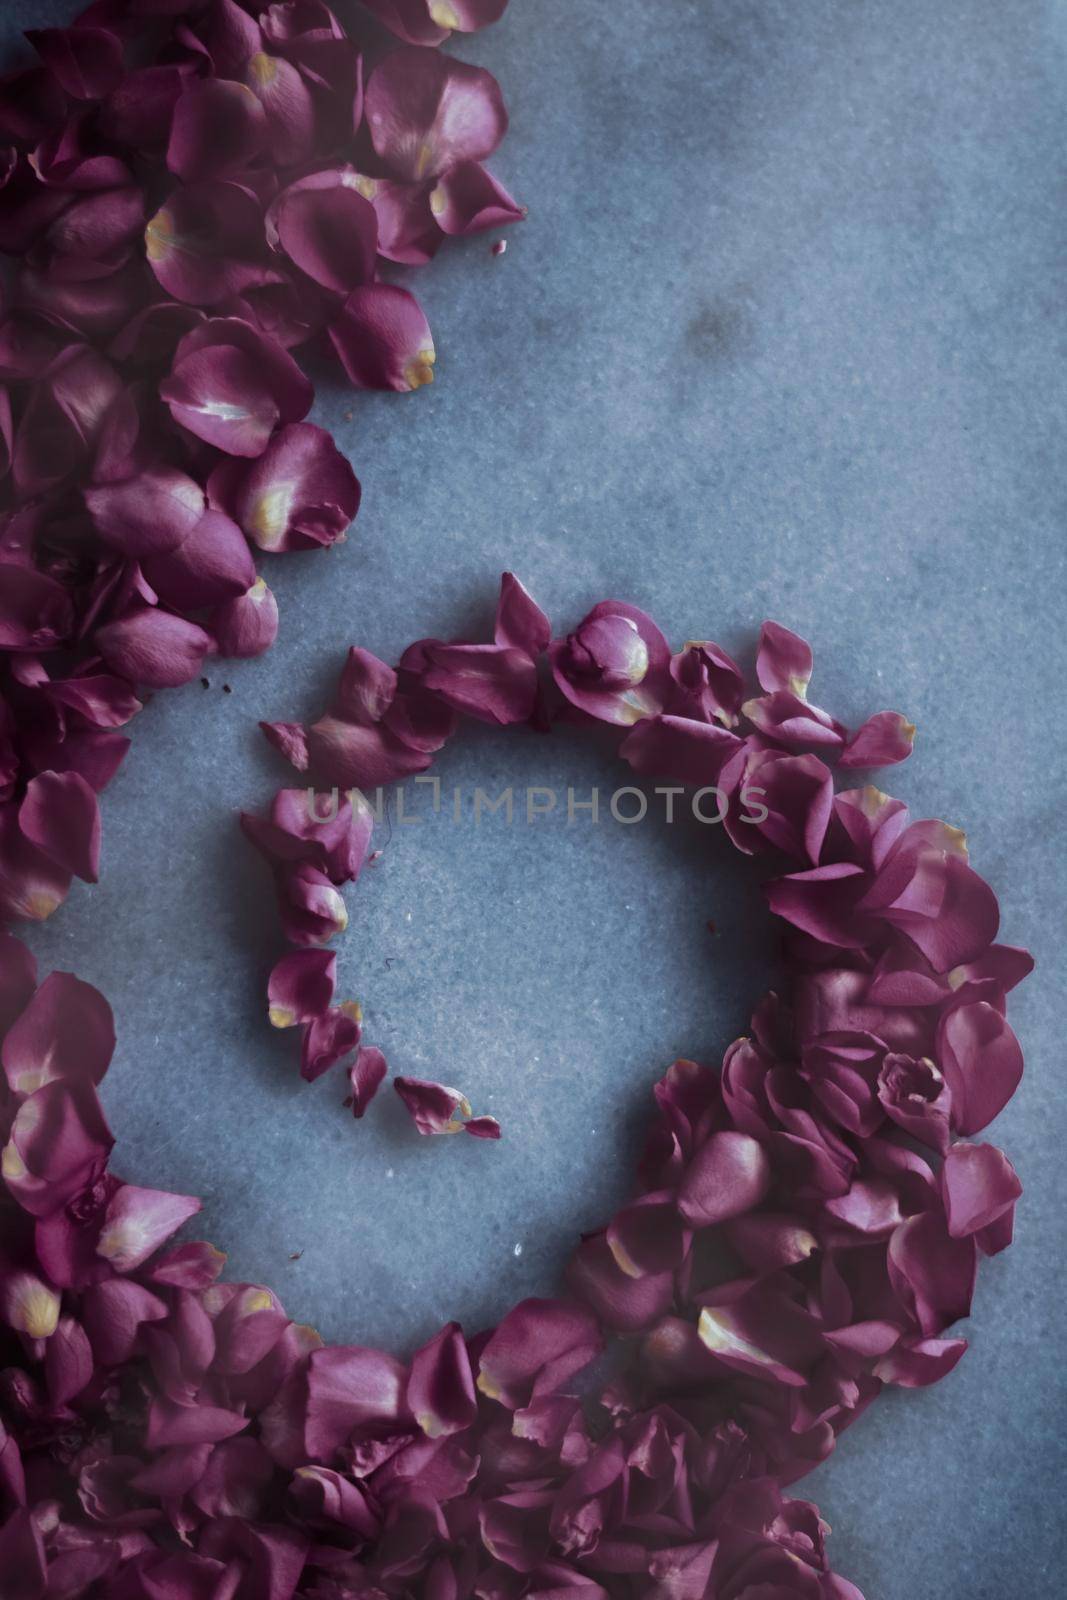 Art of flowers, wedding invitation and nature beauty concept - Rose petals on marble stone, floral background